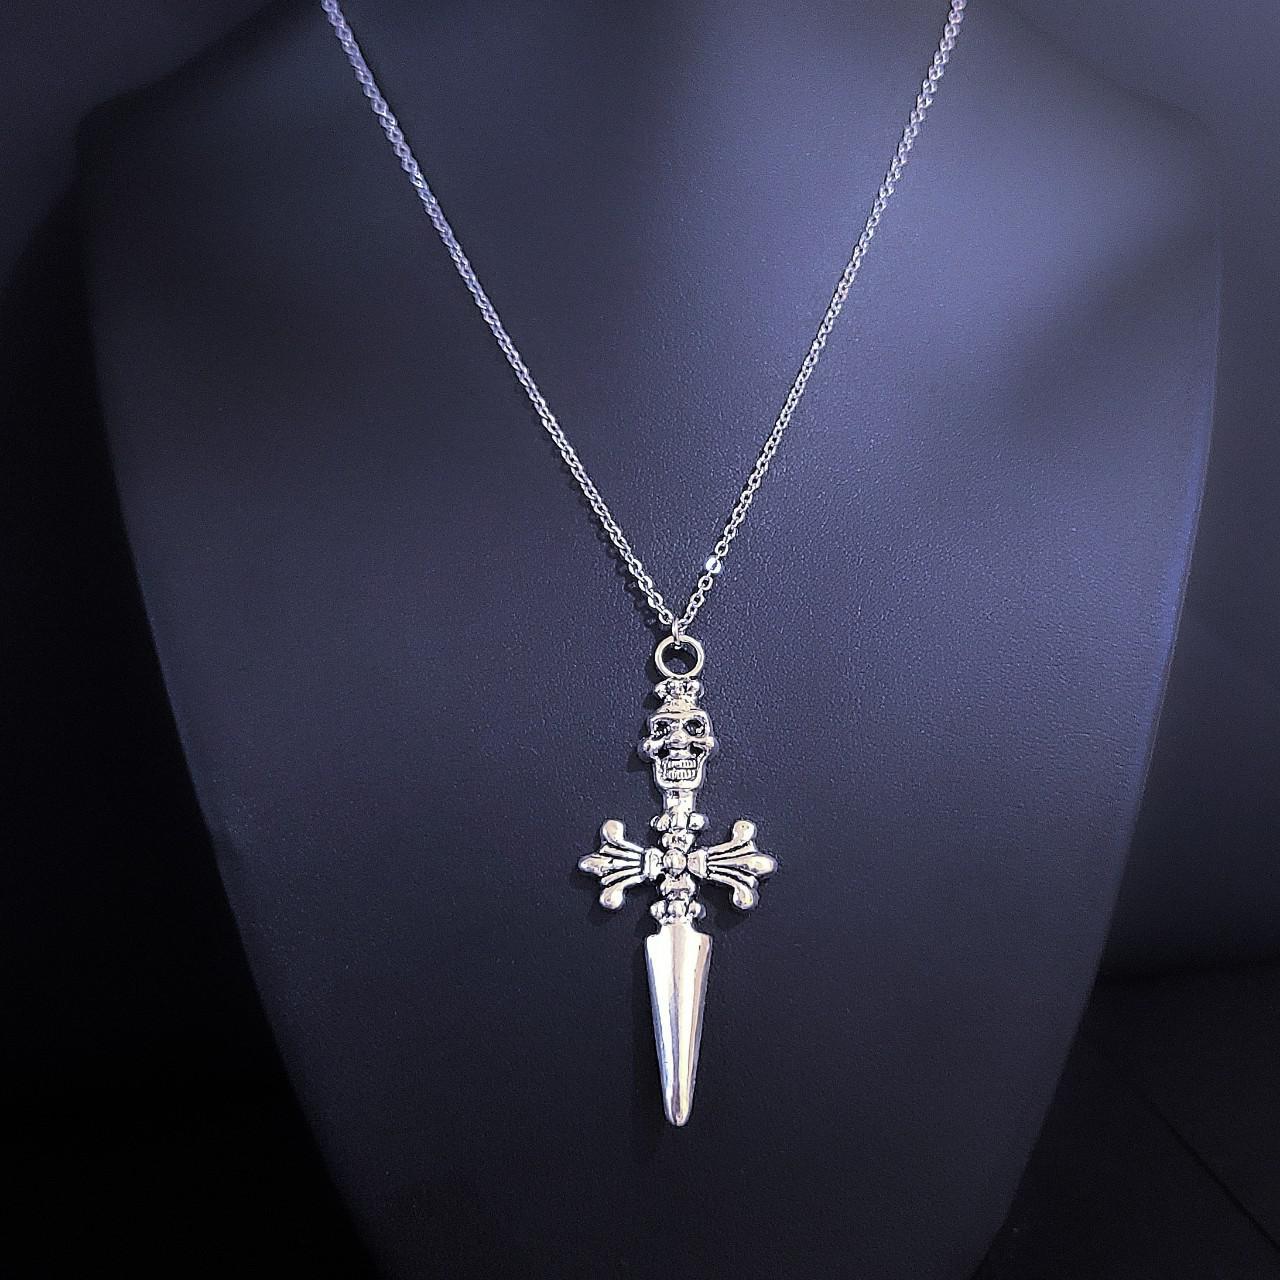 Product Image 1 - 18" Skull Sword Necklace 001

Stainless